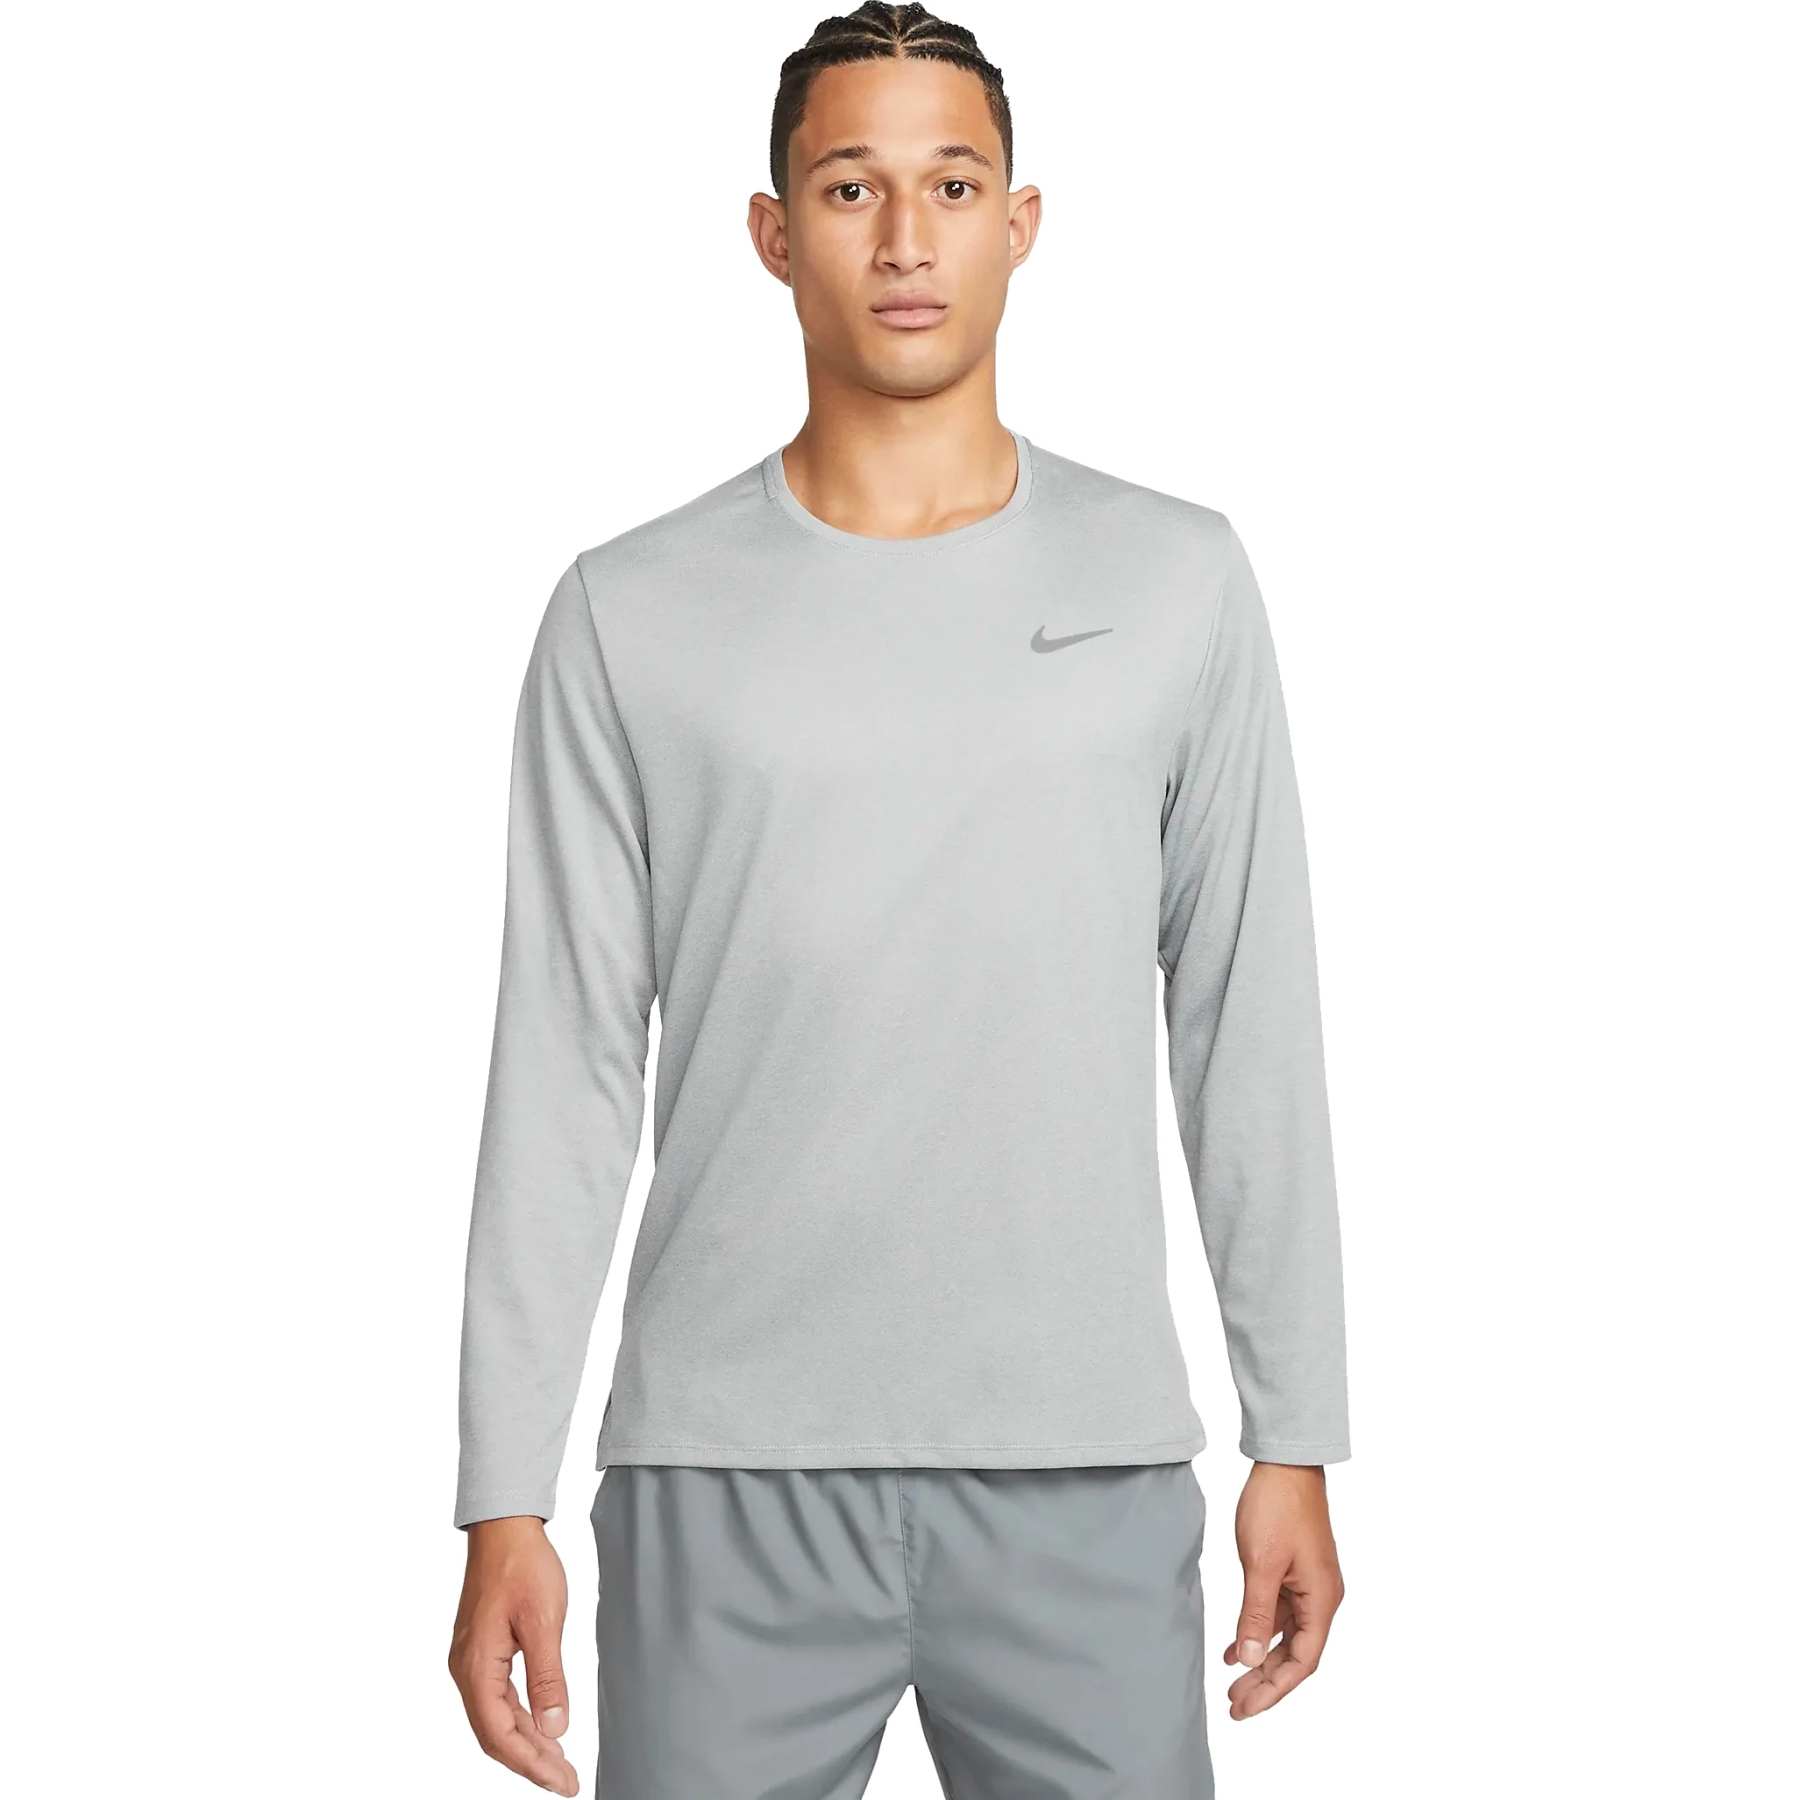 Picture of Nike Miler Dri-FIT UV Long-Sleeve Running Top Men - particle grey/grey fog/reflective silver FB7070-073